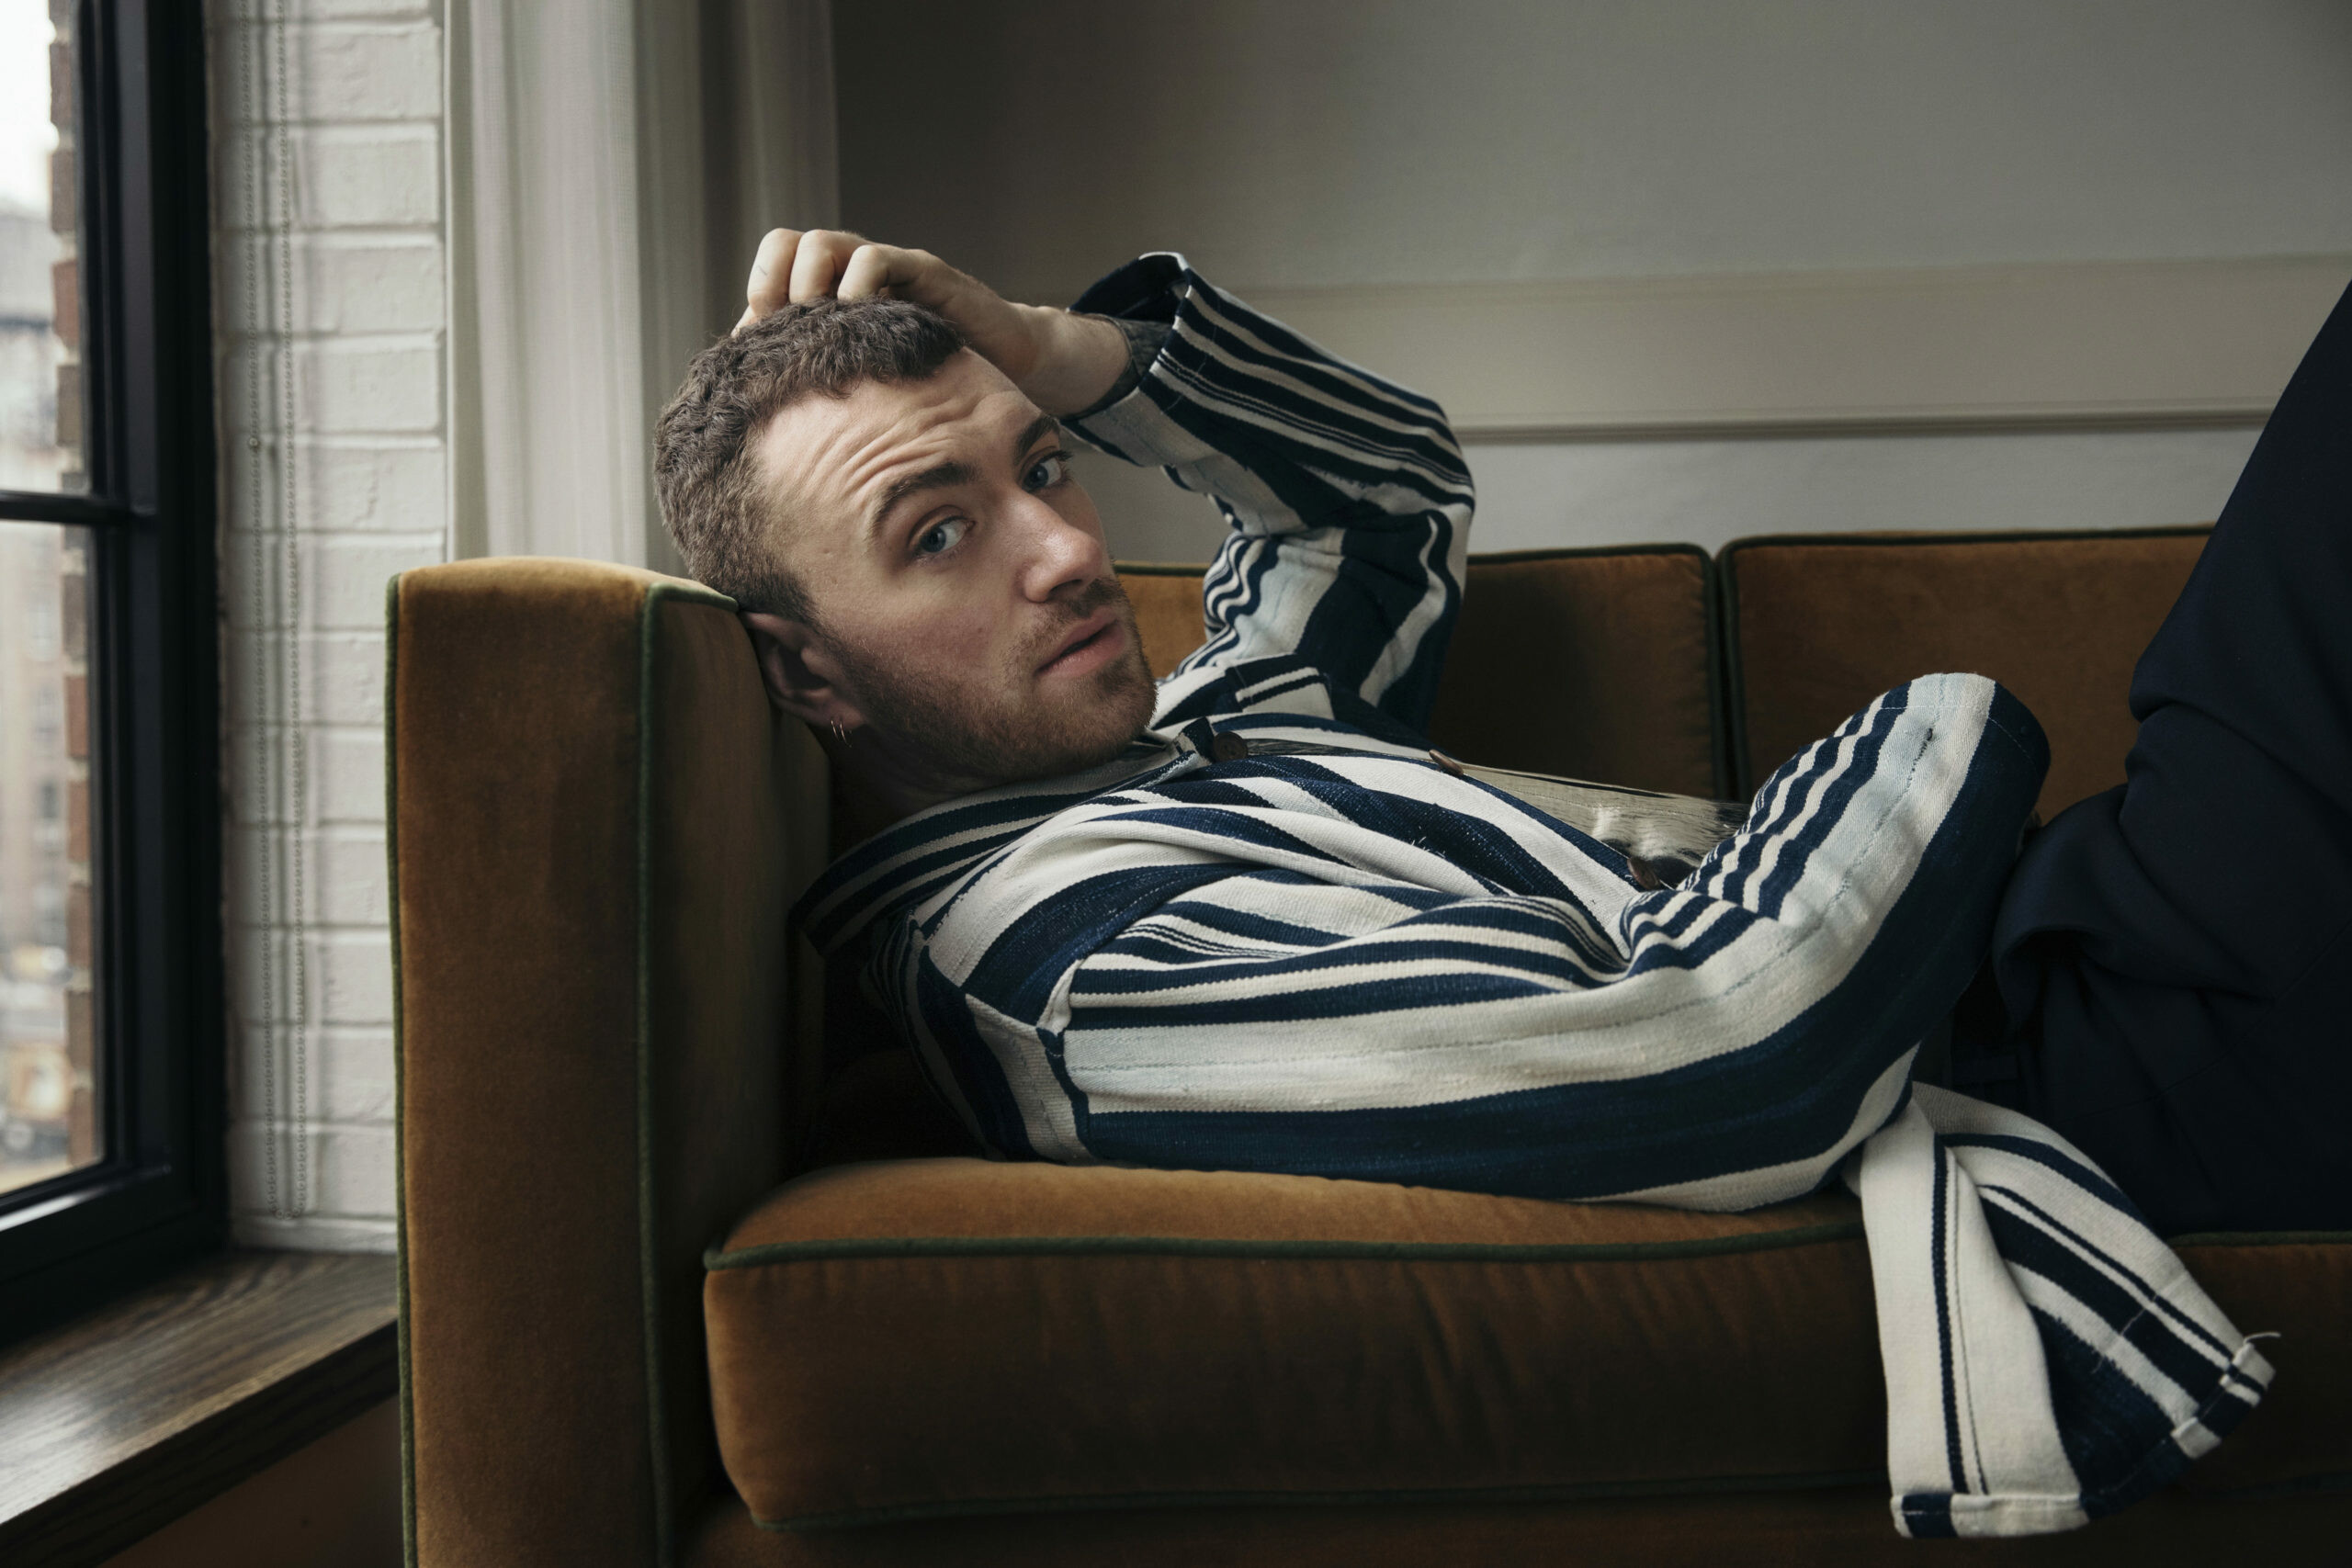 Sam Smith: "Like I Can" was released as the album's fifth single on 5 December 2014. 2560x1710 HD Wallpaper.